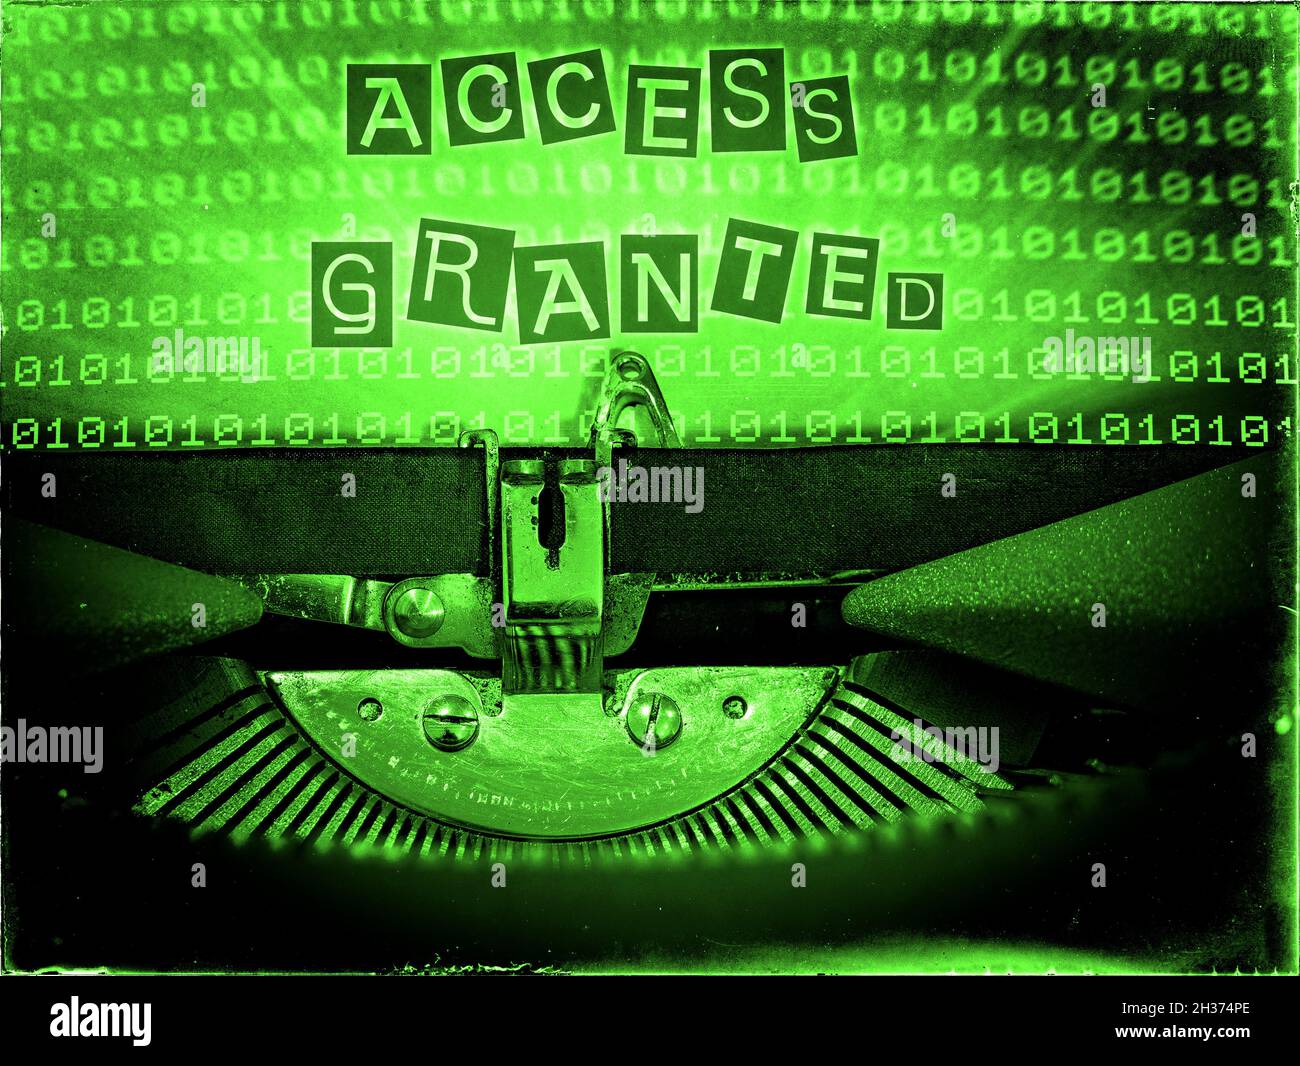 Access Granted displayed on a vintage typewriter in a green tone Stock Photo